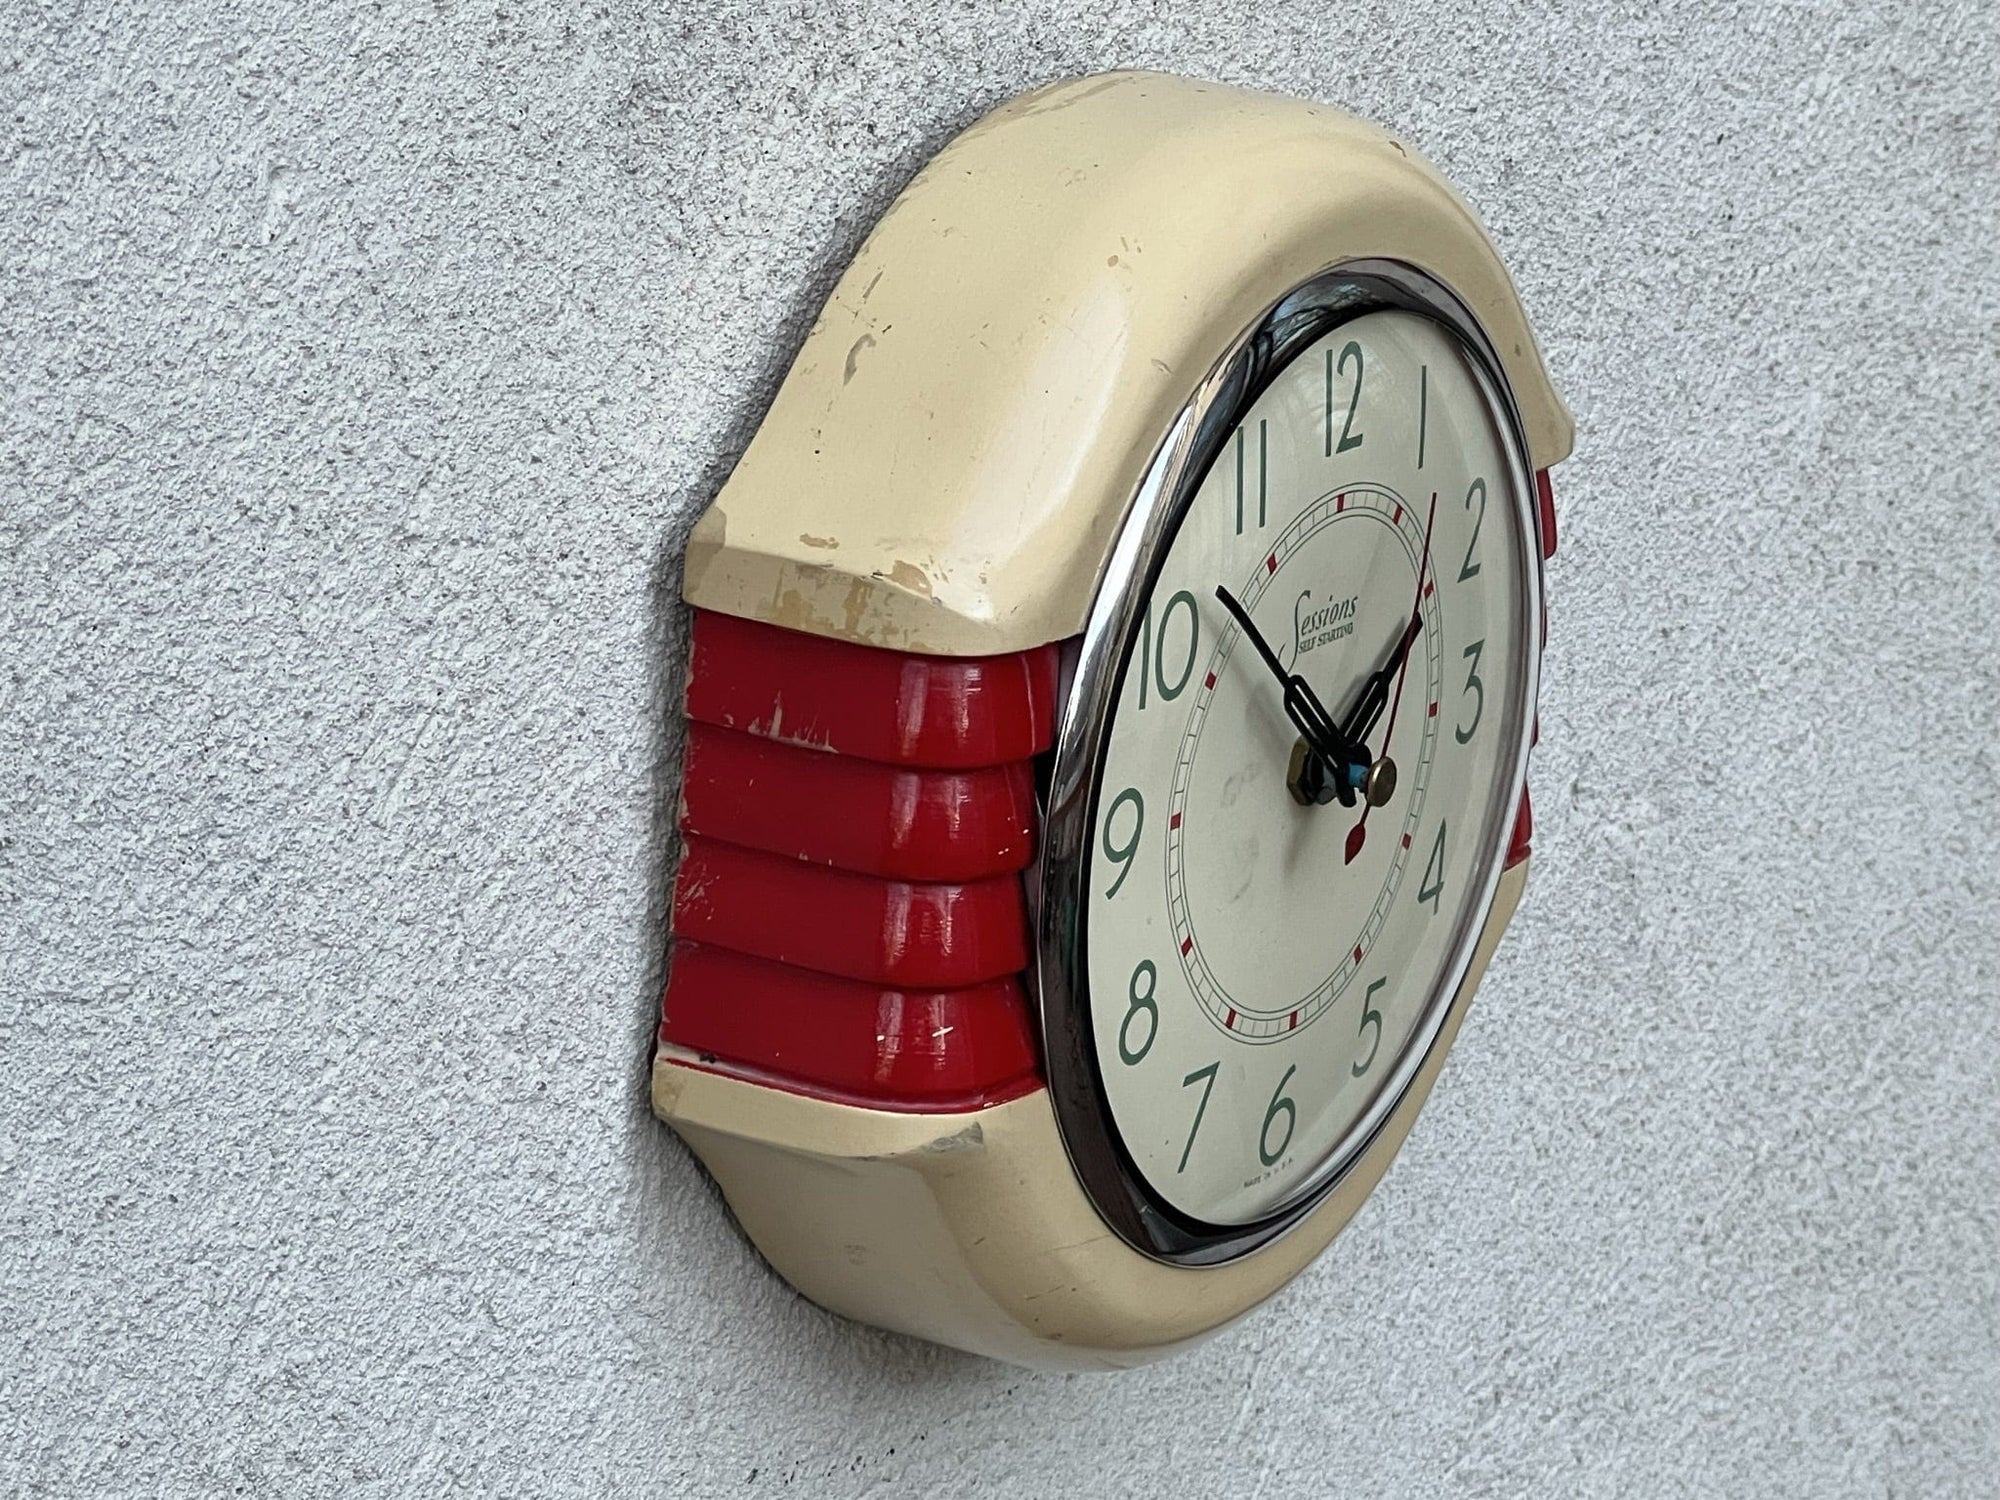 I Like Mike's Mid Century Modern Wall Clocks Sessions White Red Wood "Self Starter" Wall Clock with Updated Quartz Movement, Original Hands